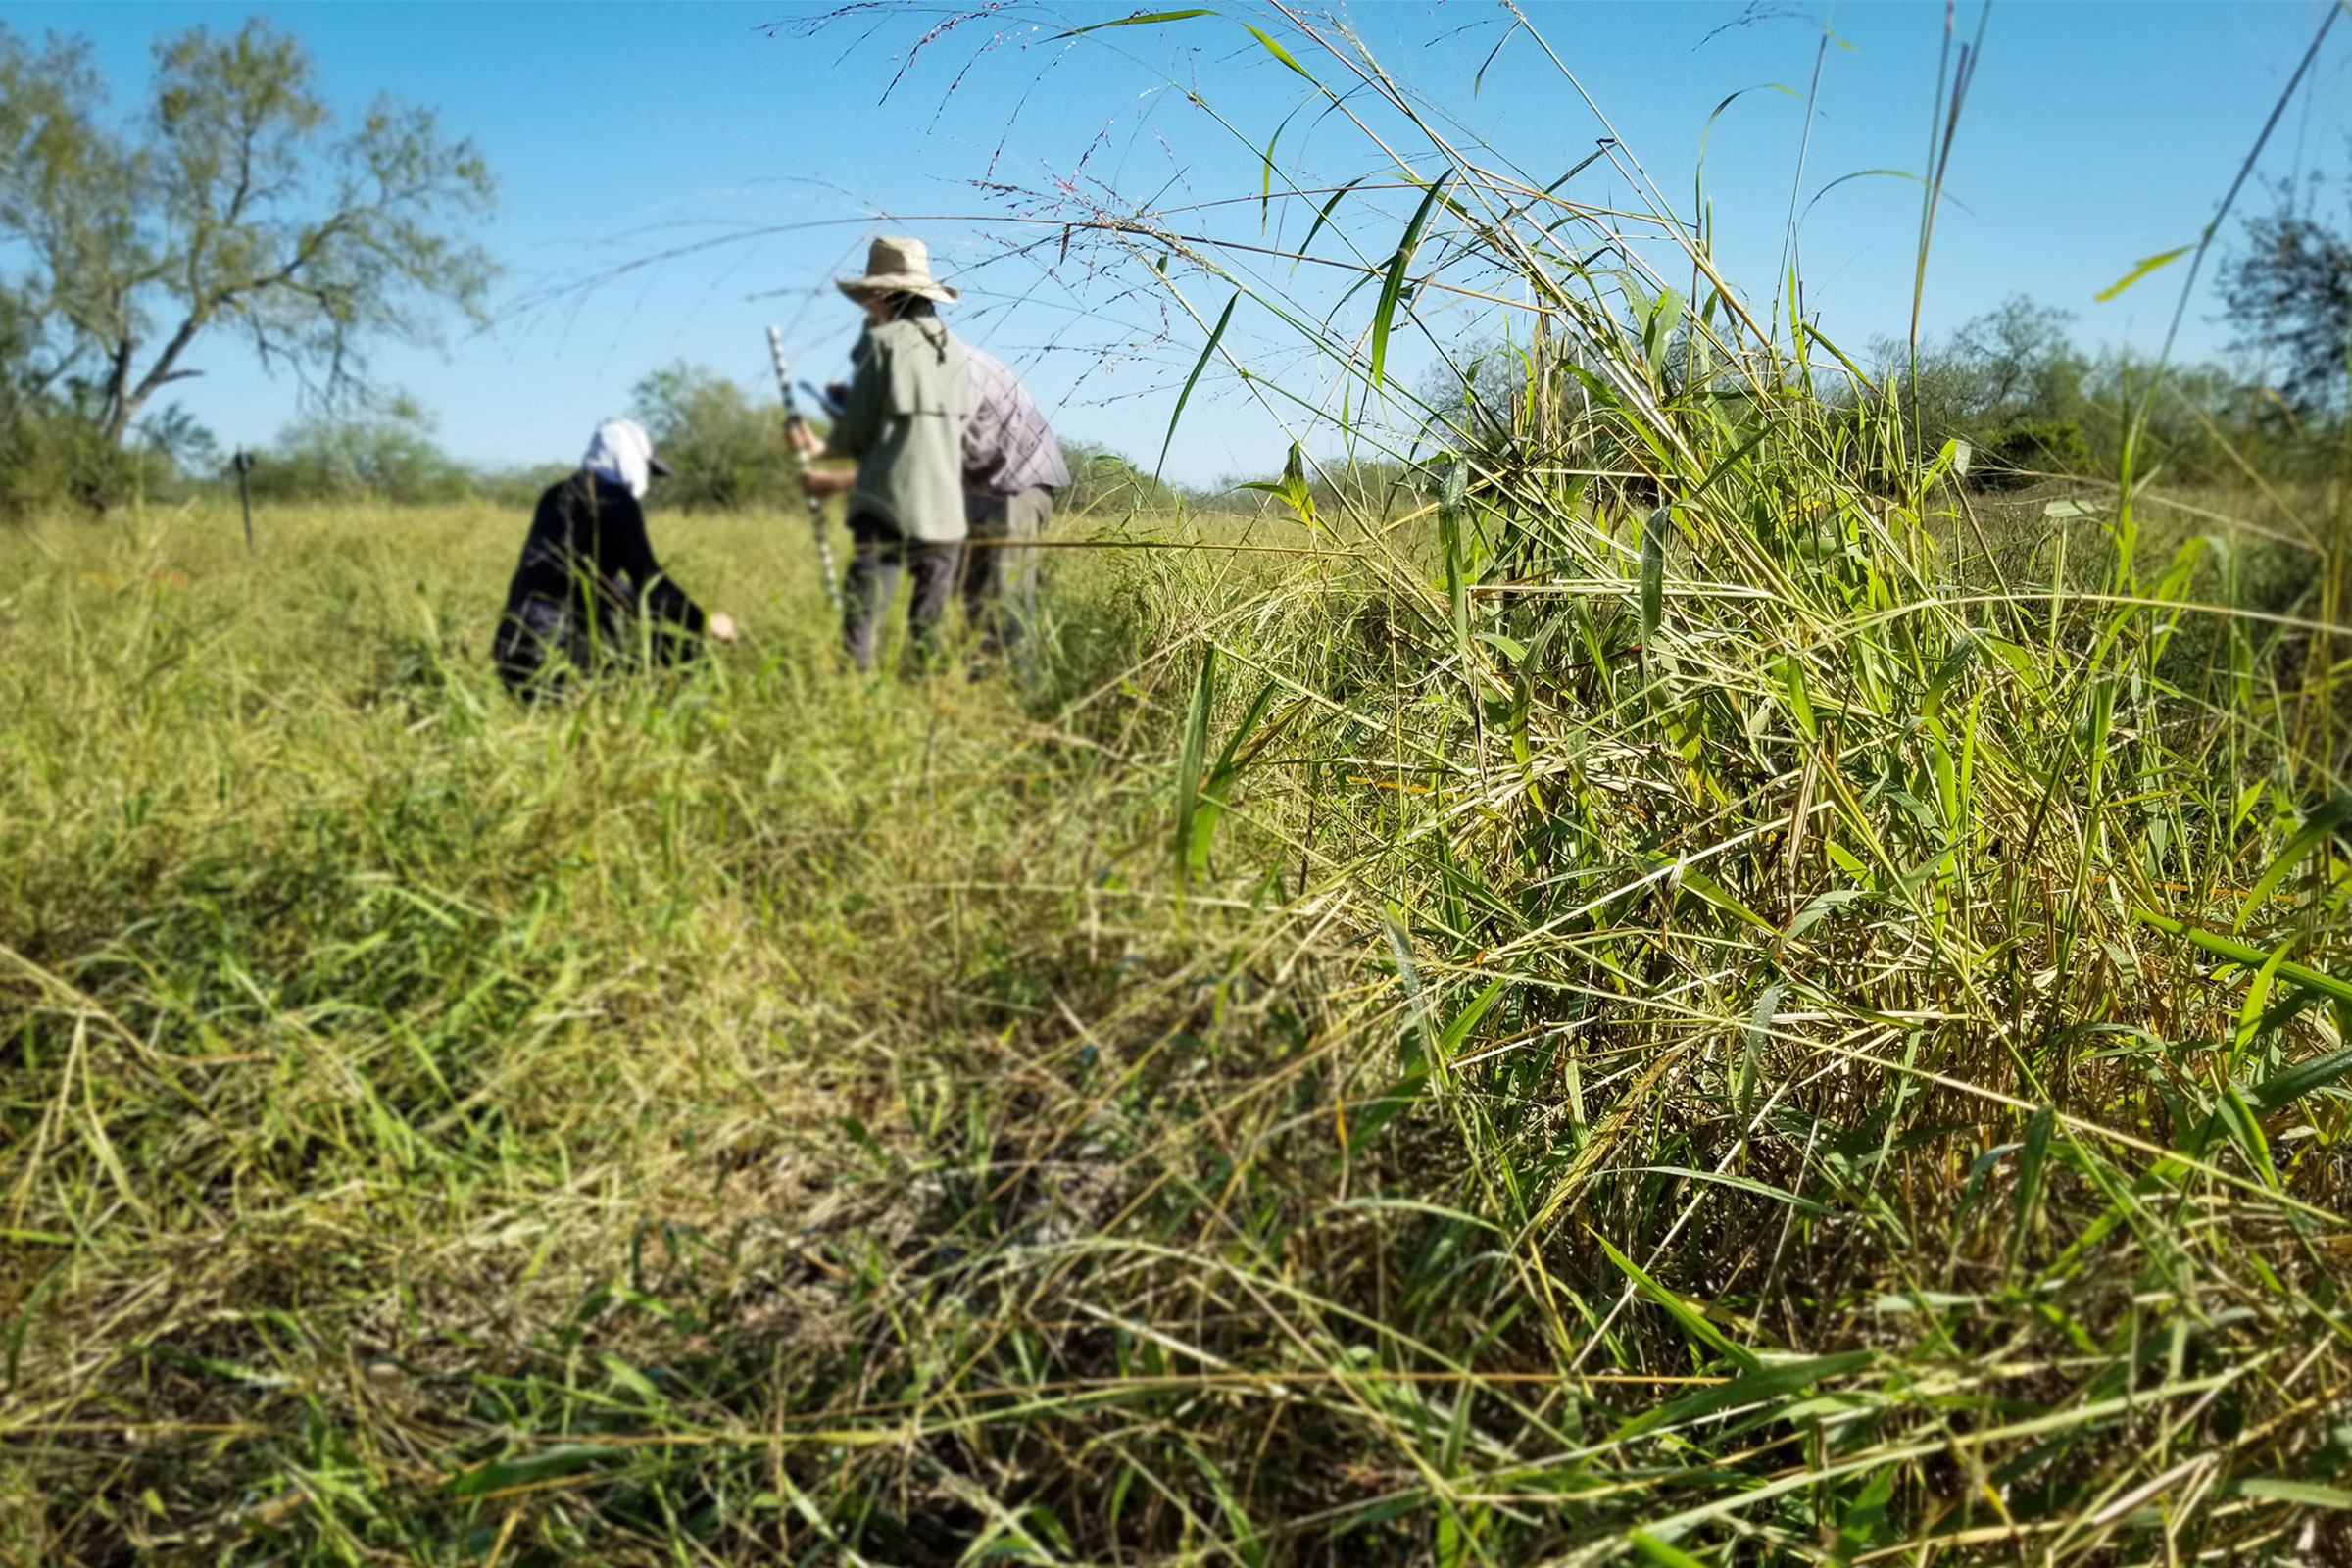 Invasive Grass in Texas Uses Chemical Warfare to Crowd Out Native Species